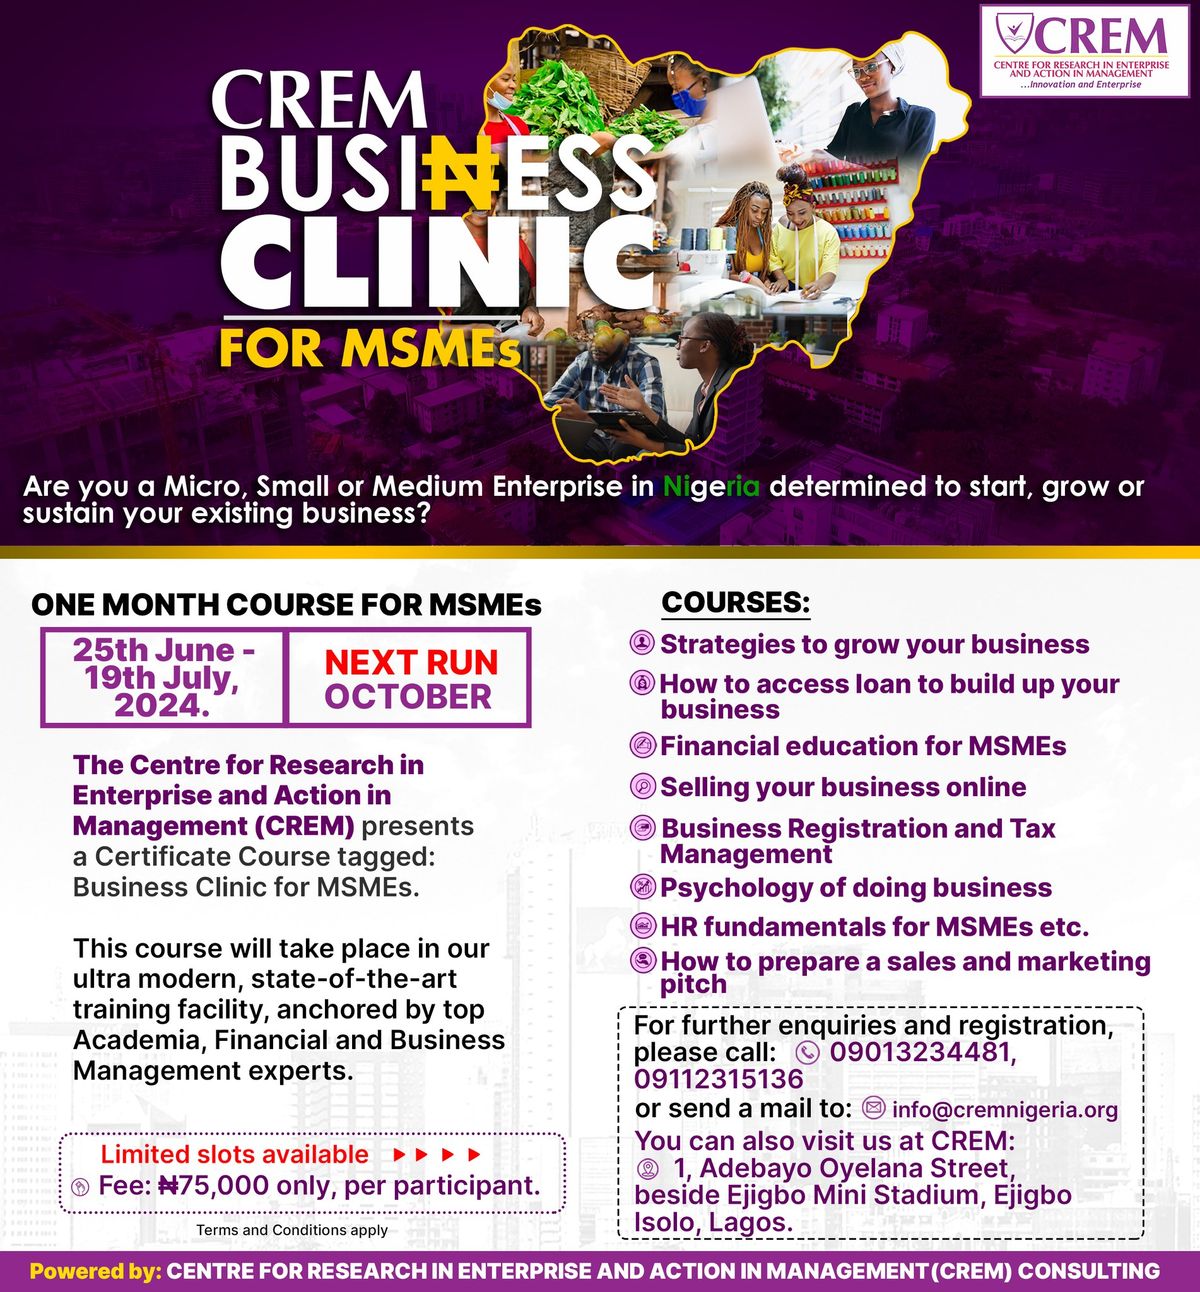 CREM Business Clinic for MSMEs